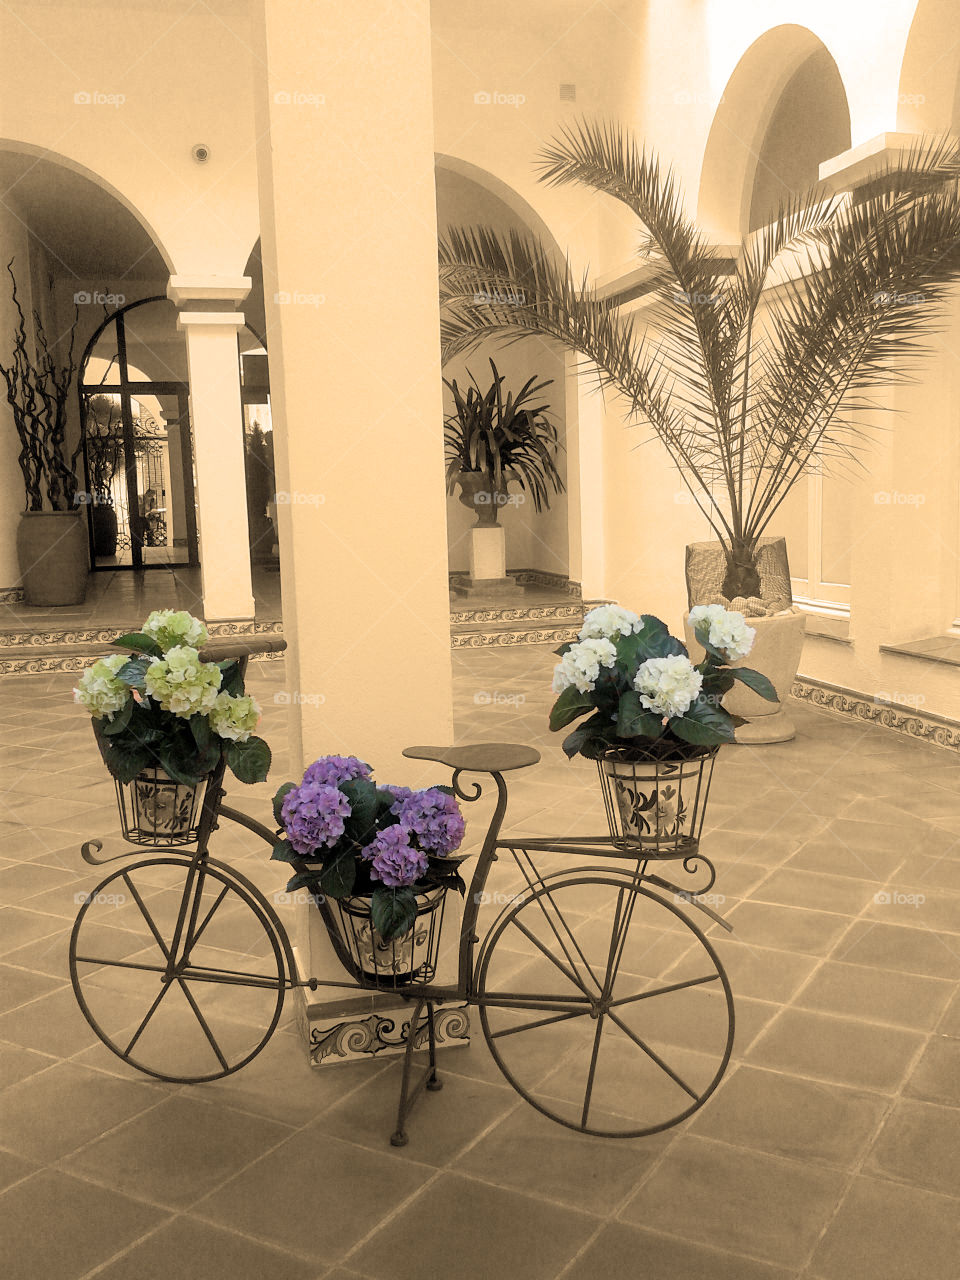 Potted plants on bicycle